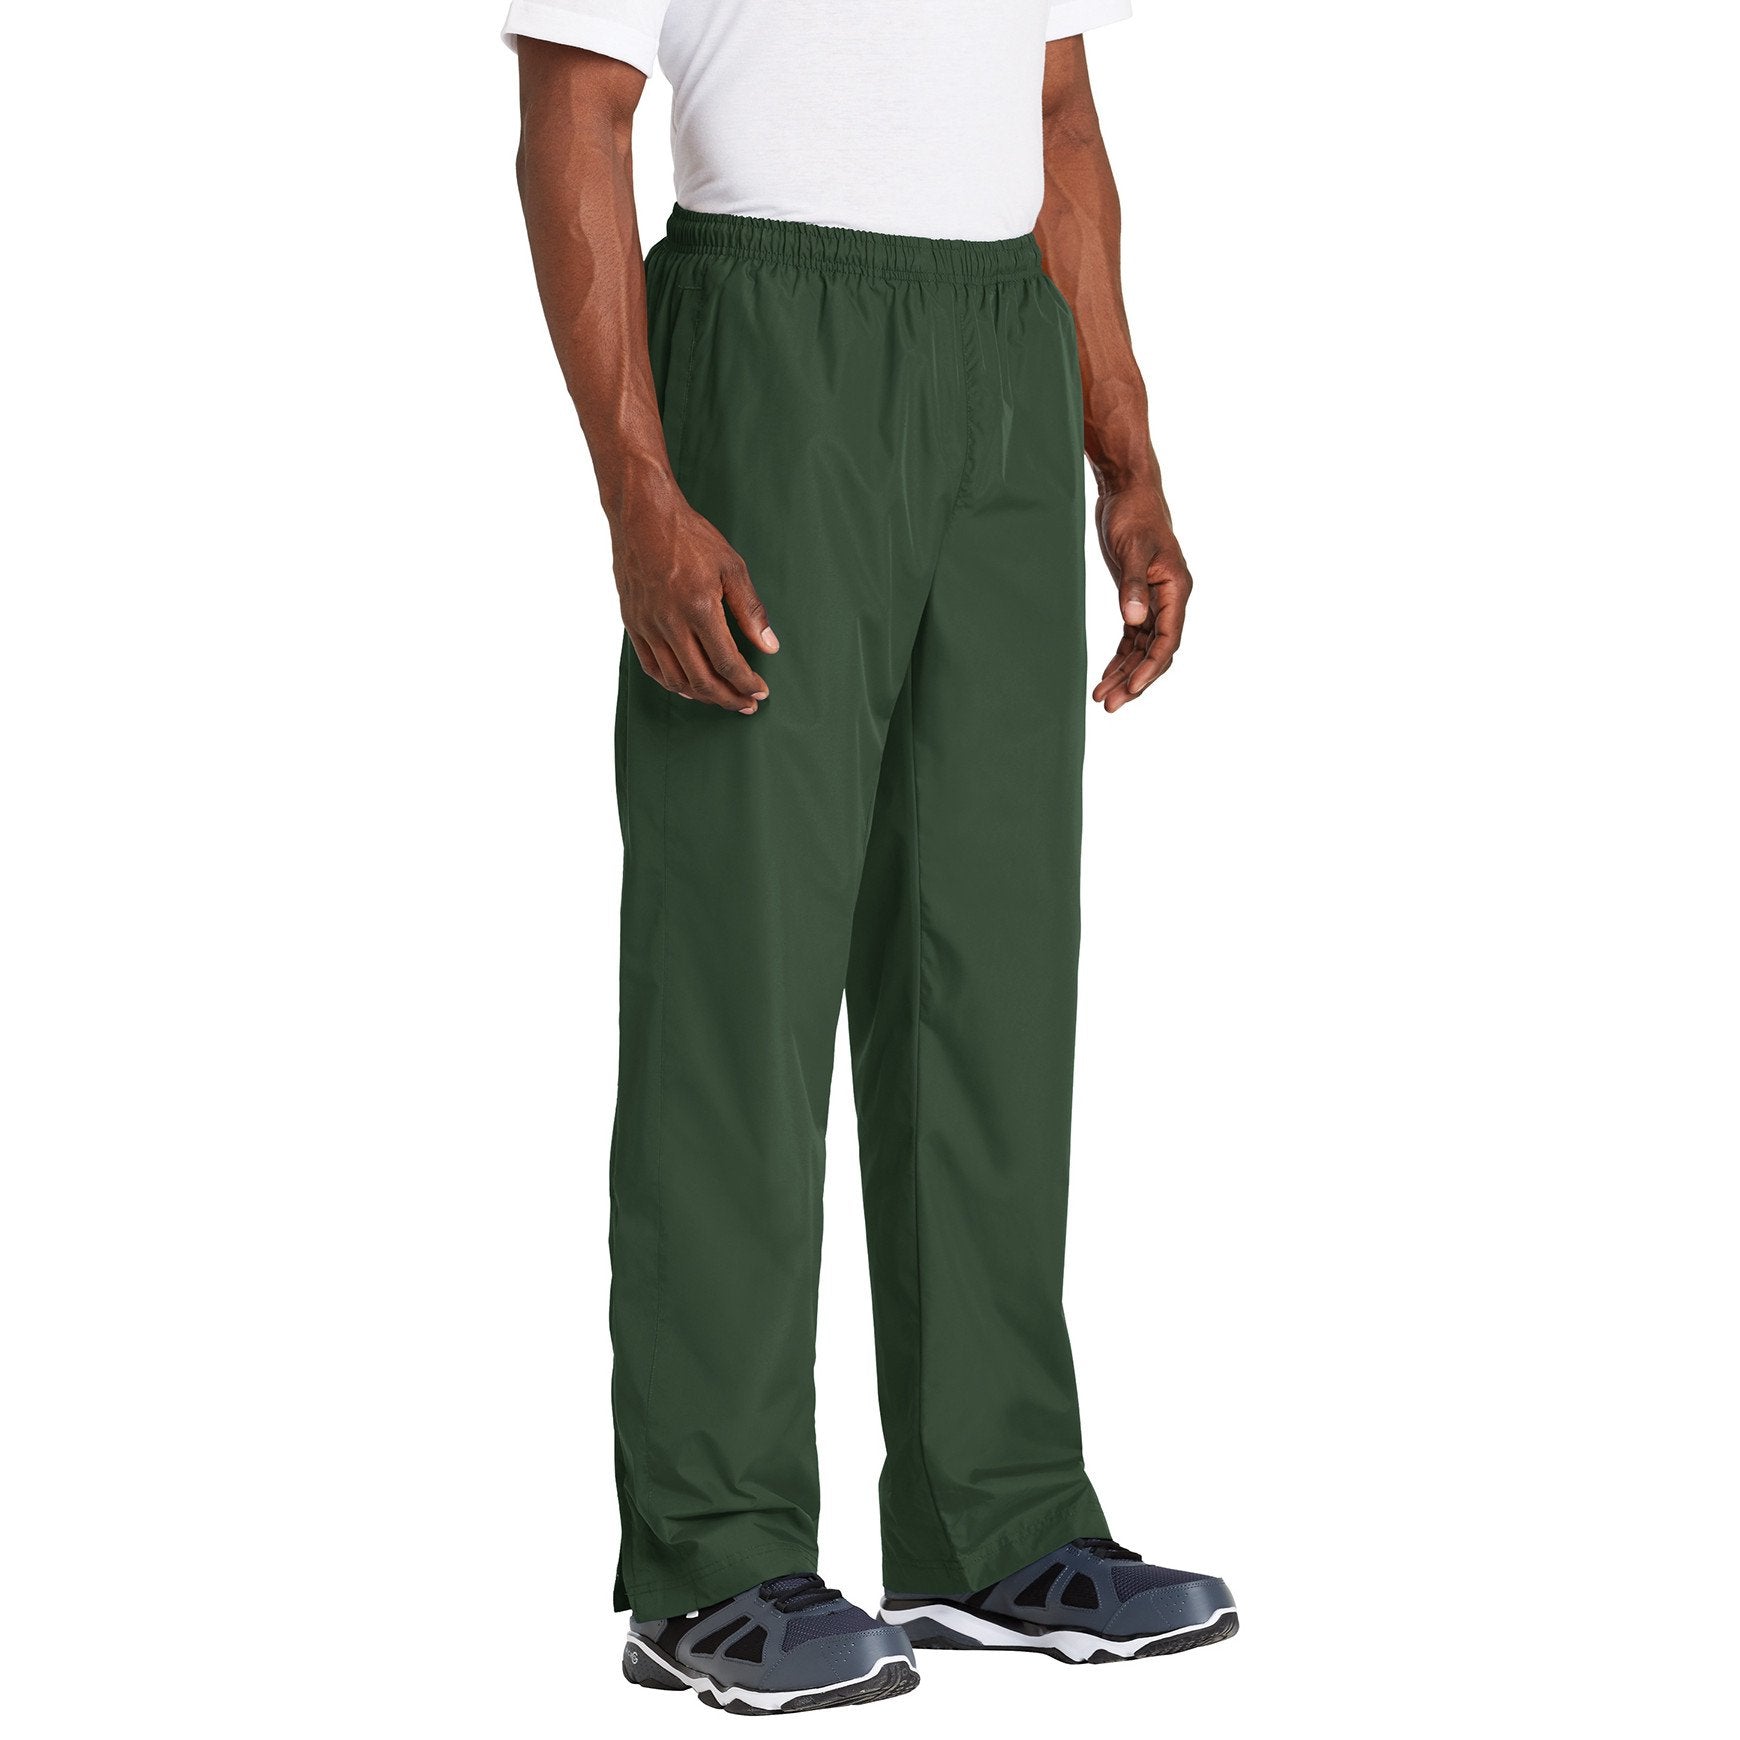 A-dam solid green purple lounge pants from pure organic cotton | A-dam